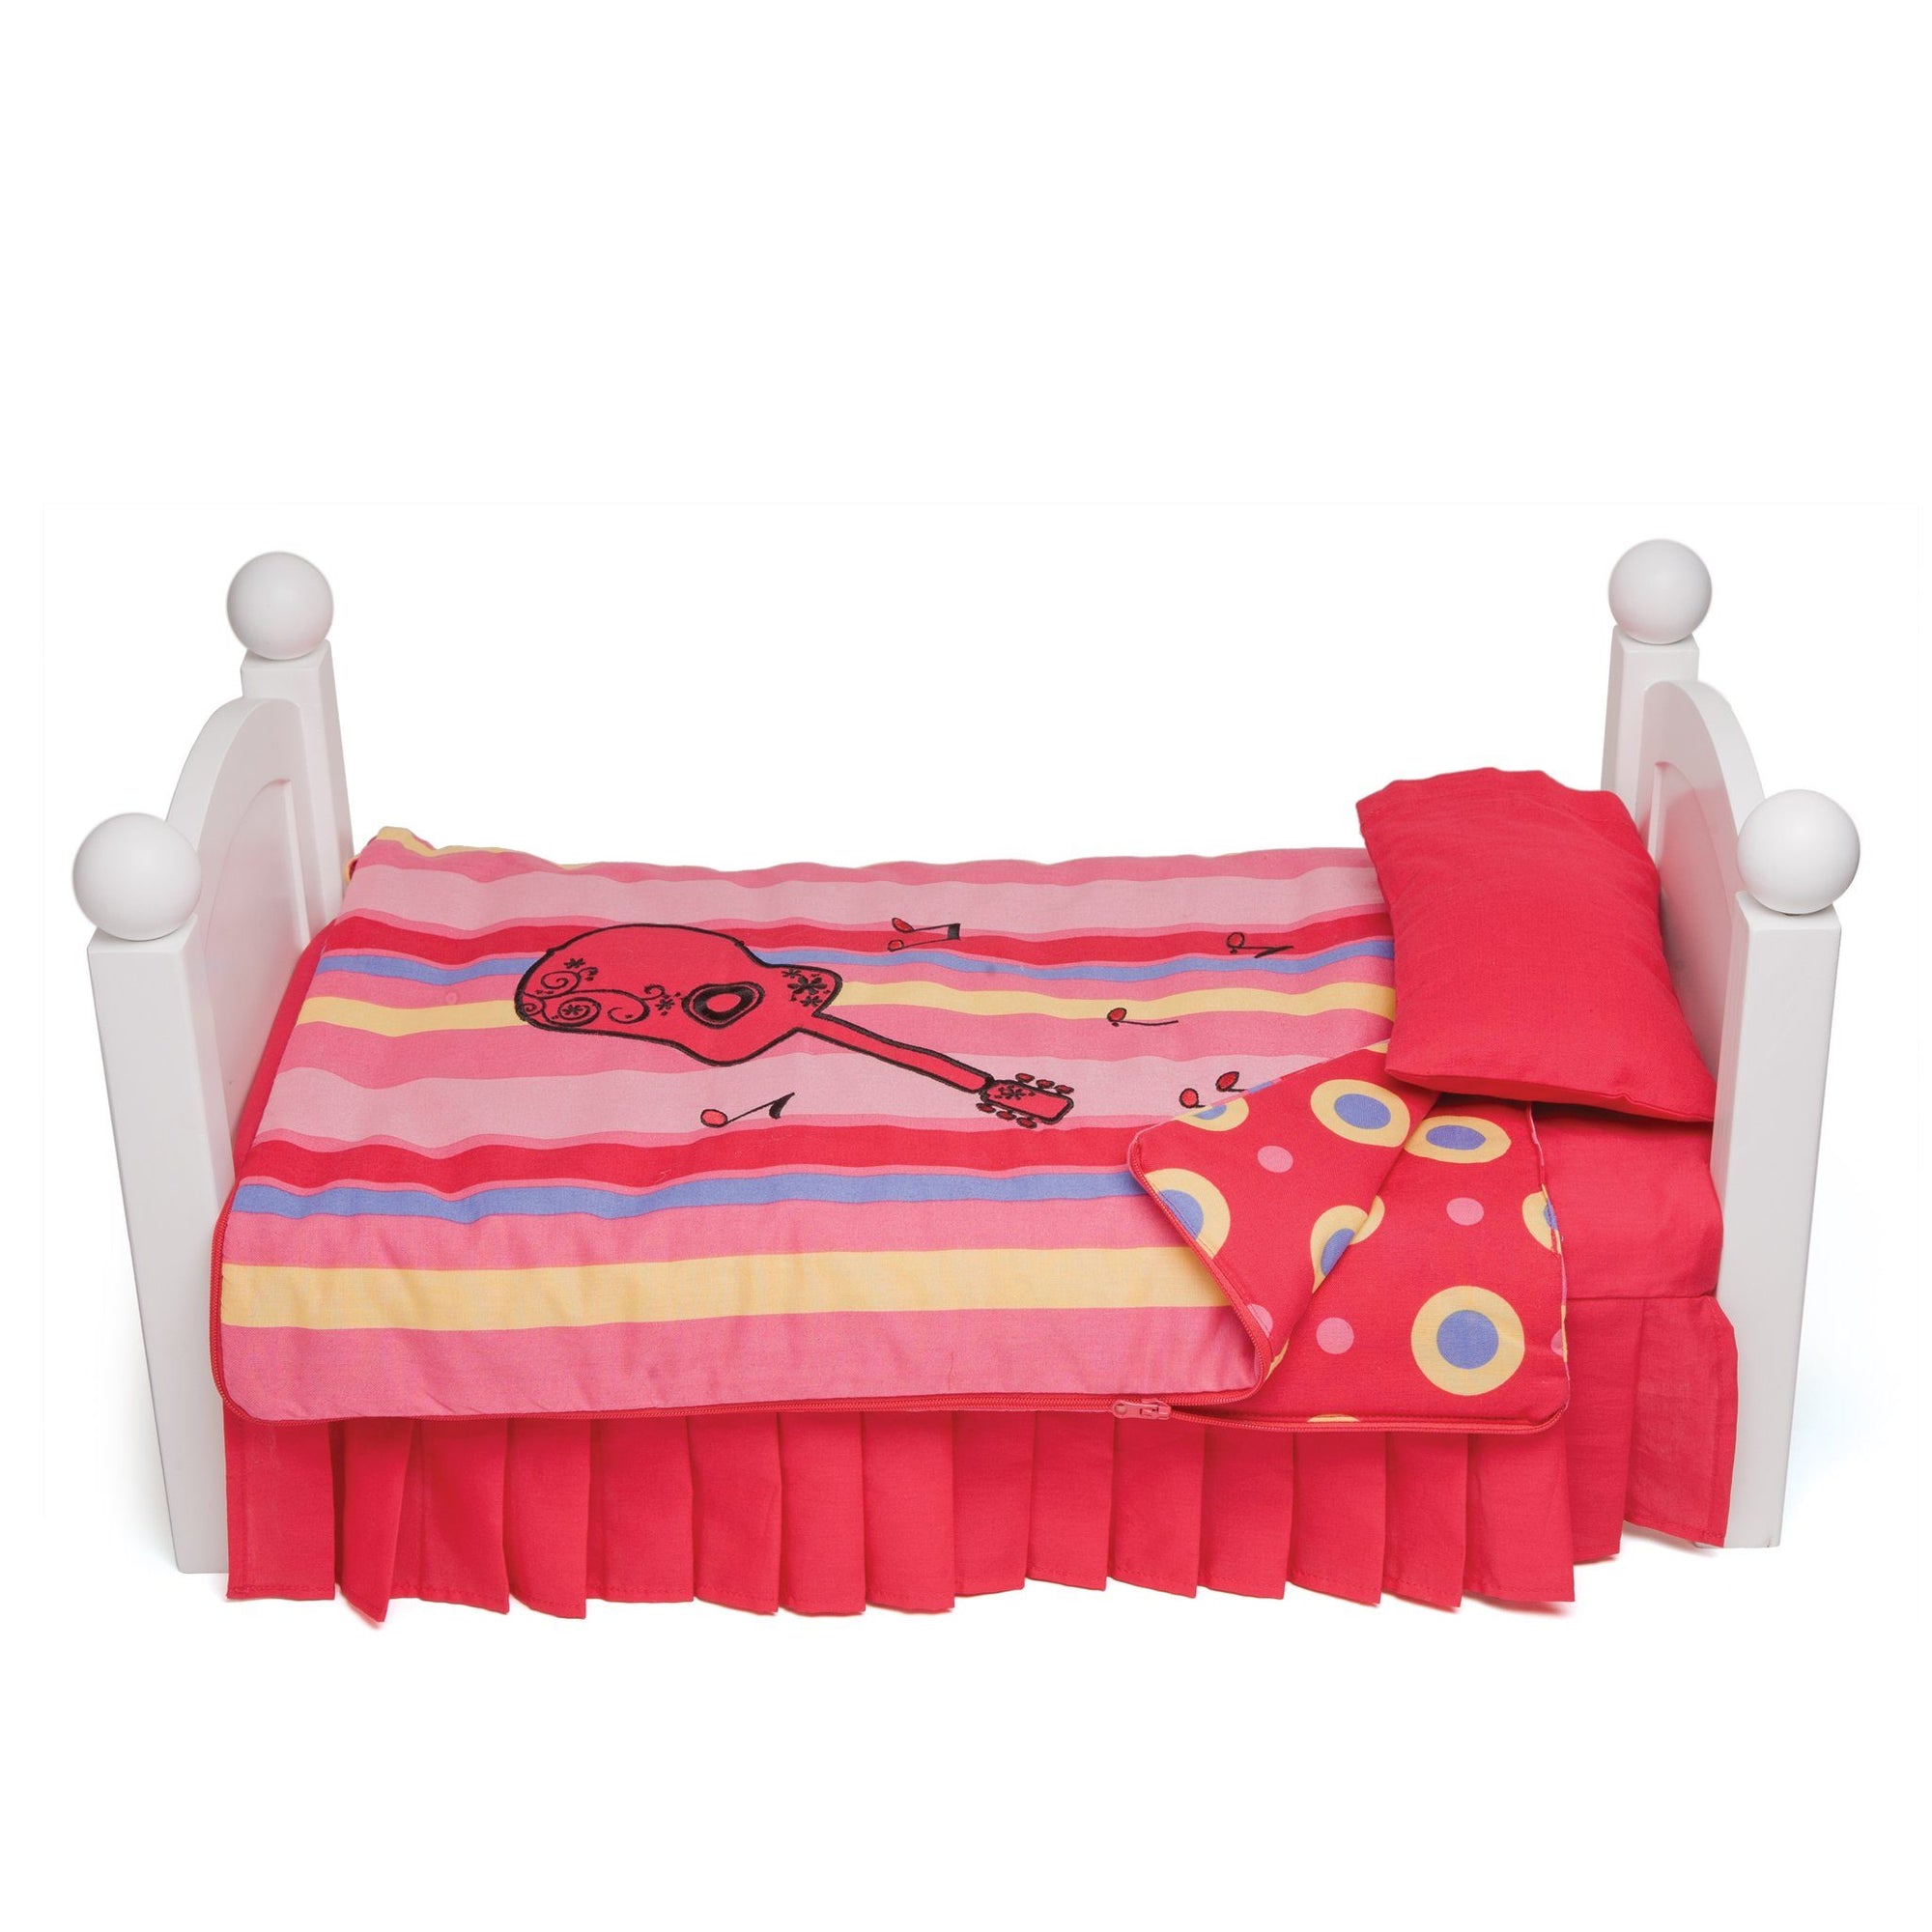 Harmony red guitar-themed doll bedding with mattress, pillow and striped pattern comforter and contrast circle pattern. Converts to sleeping bag. Shown on KM1 Maplelea doll bed, fits all 18 inch dolls. 